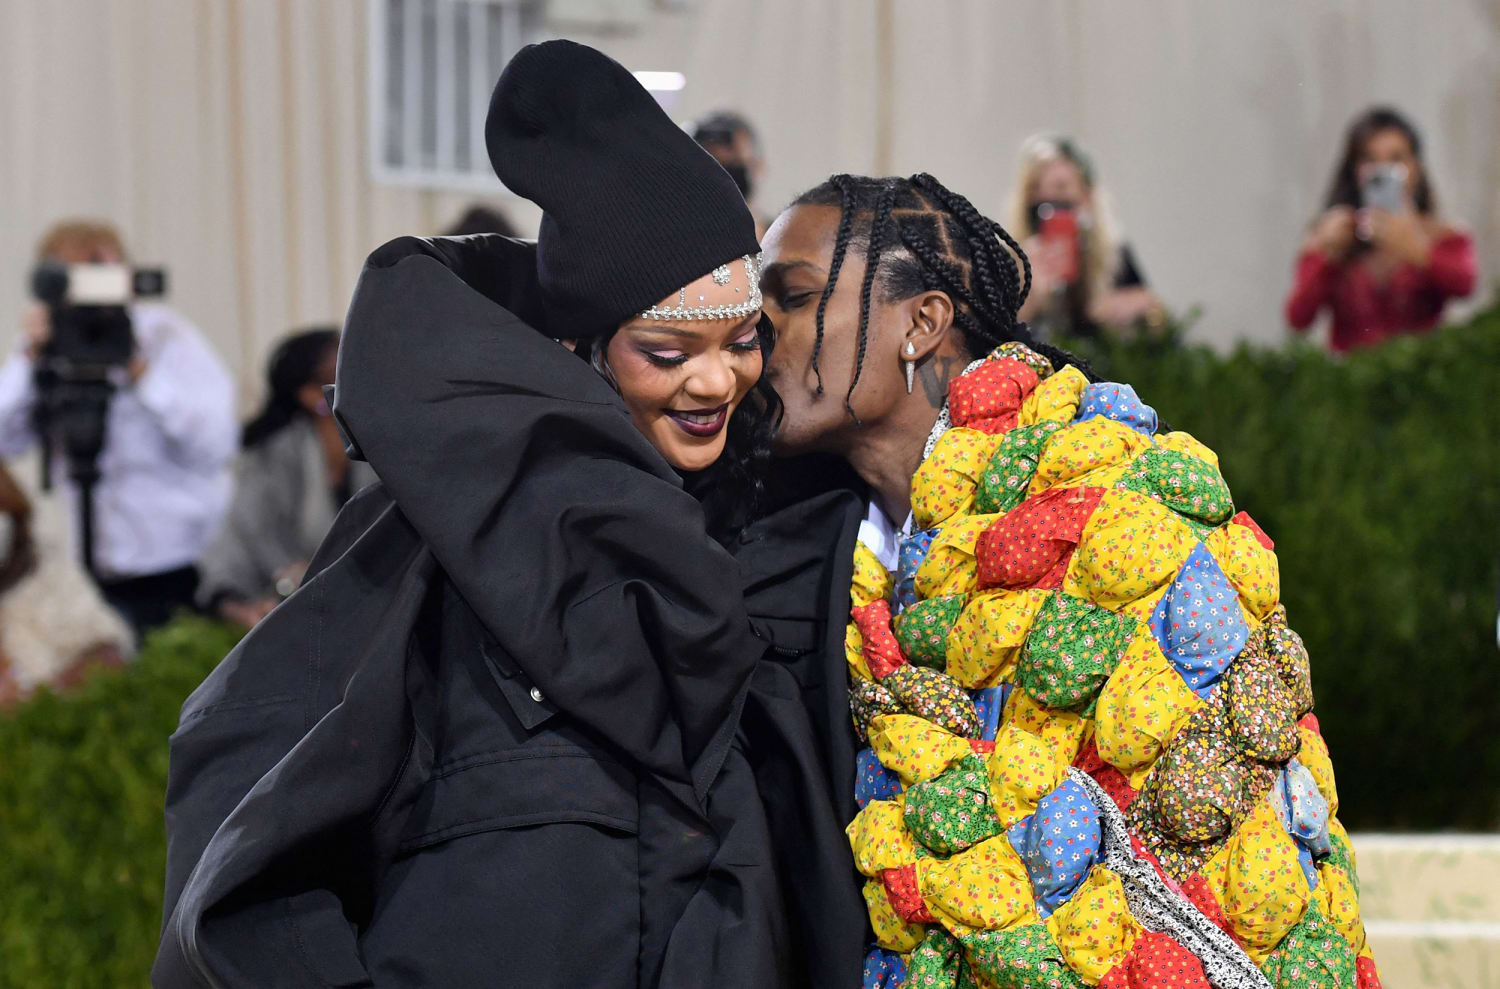 A$AP Rocky Says He's 'Proud' to Start a Family with Rihanna